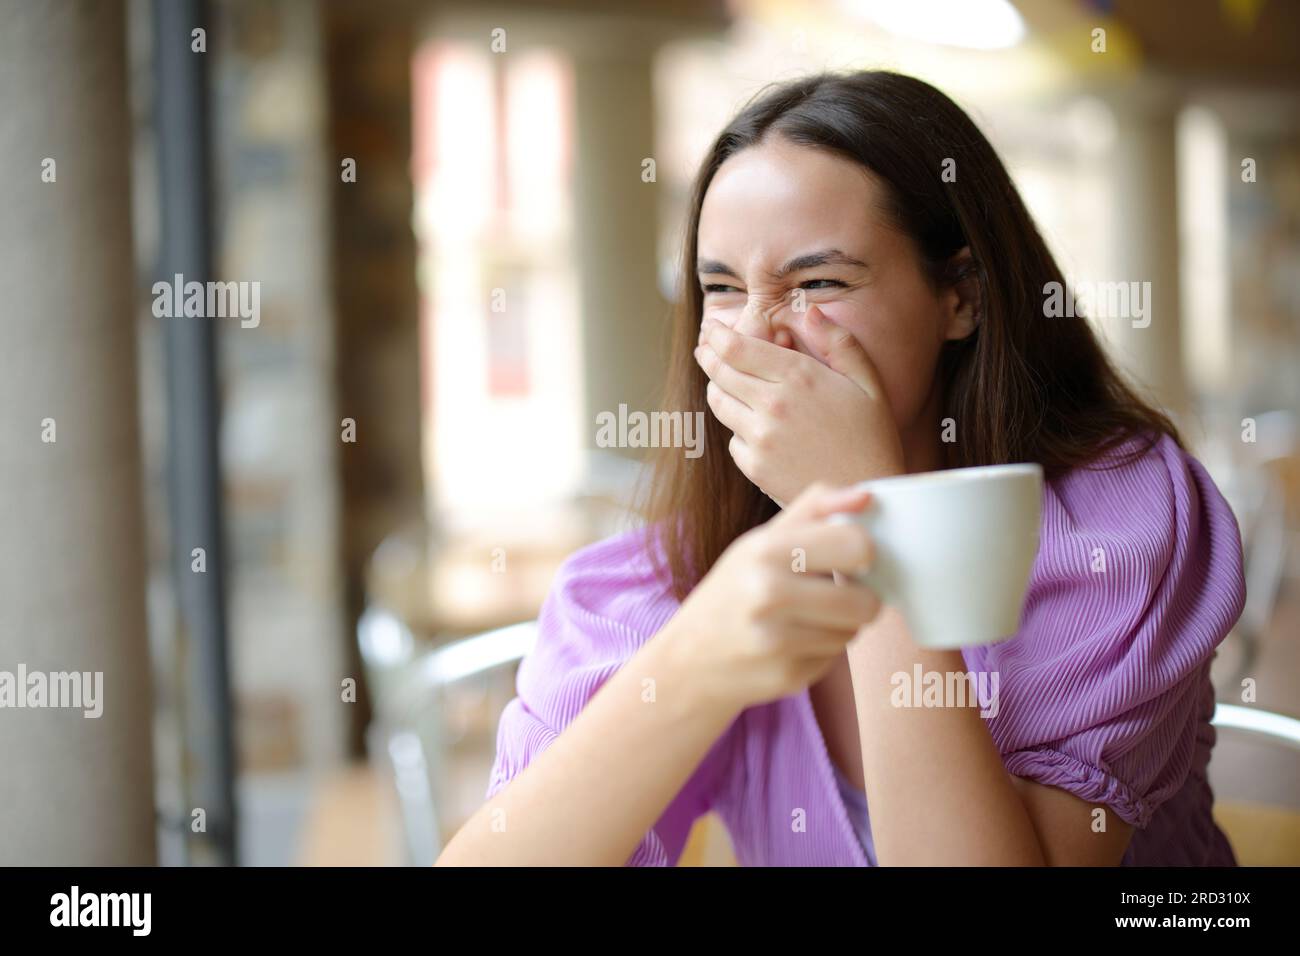 Happy woman drinking coffee laughing loud in a bar terrace Stock Photo